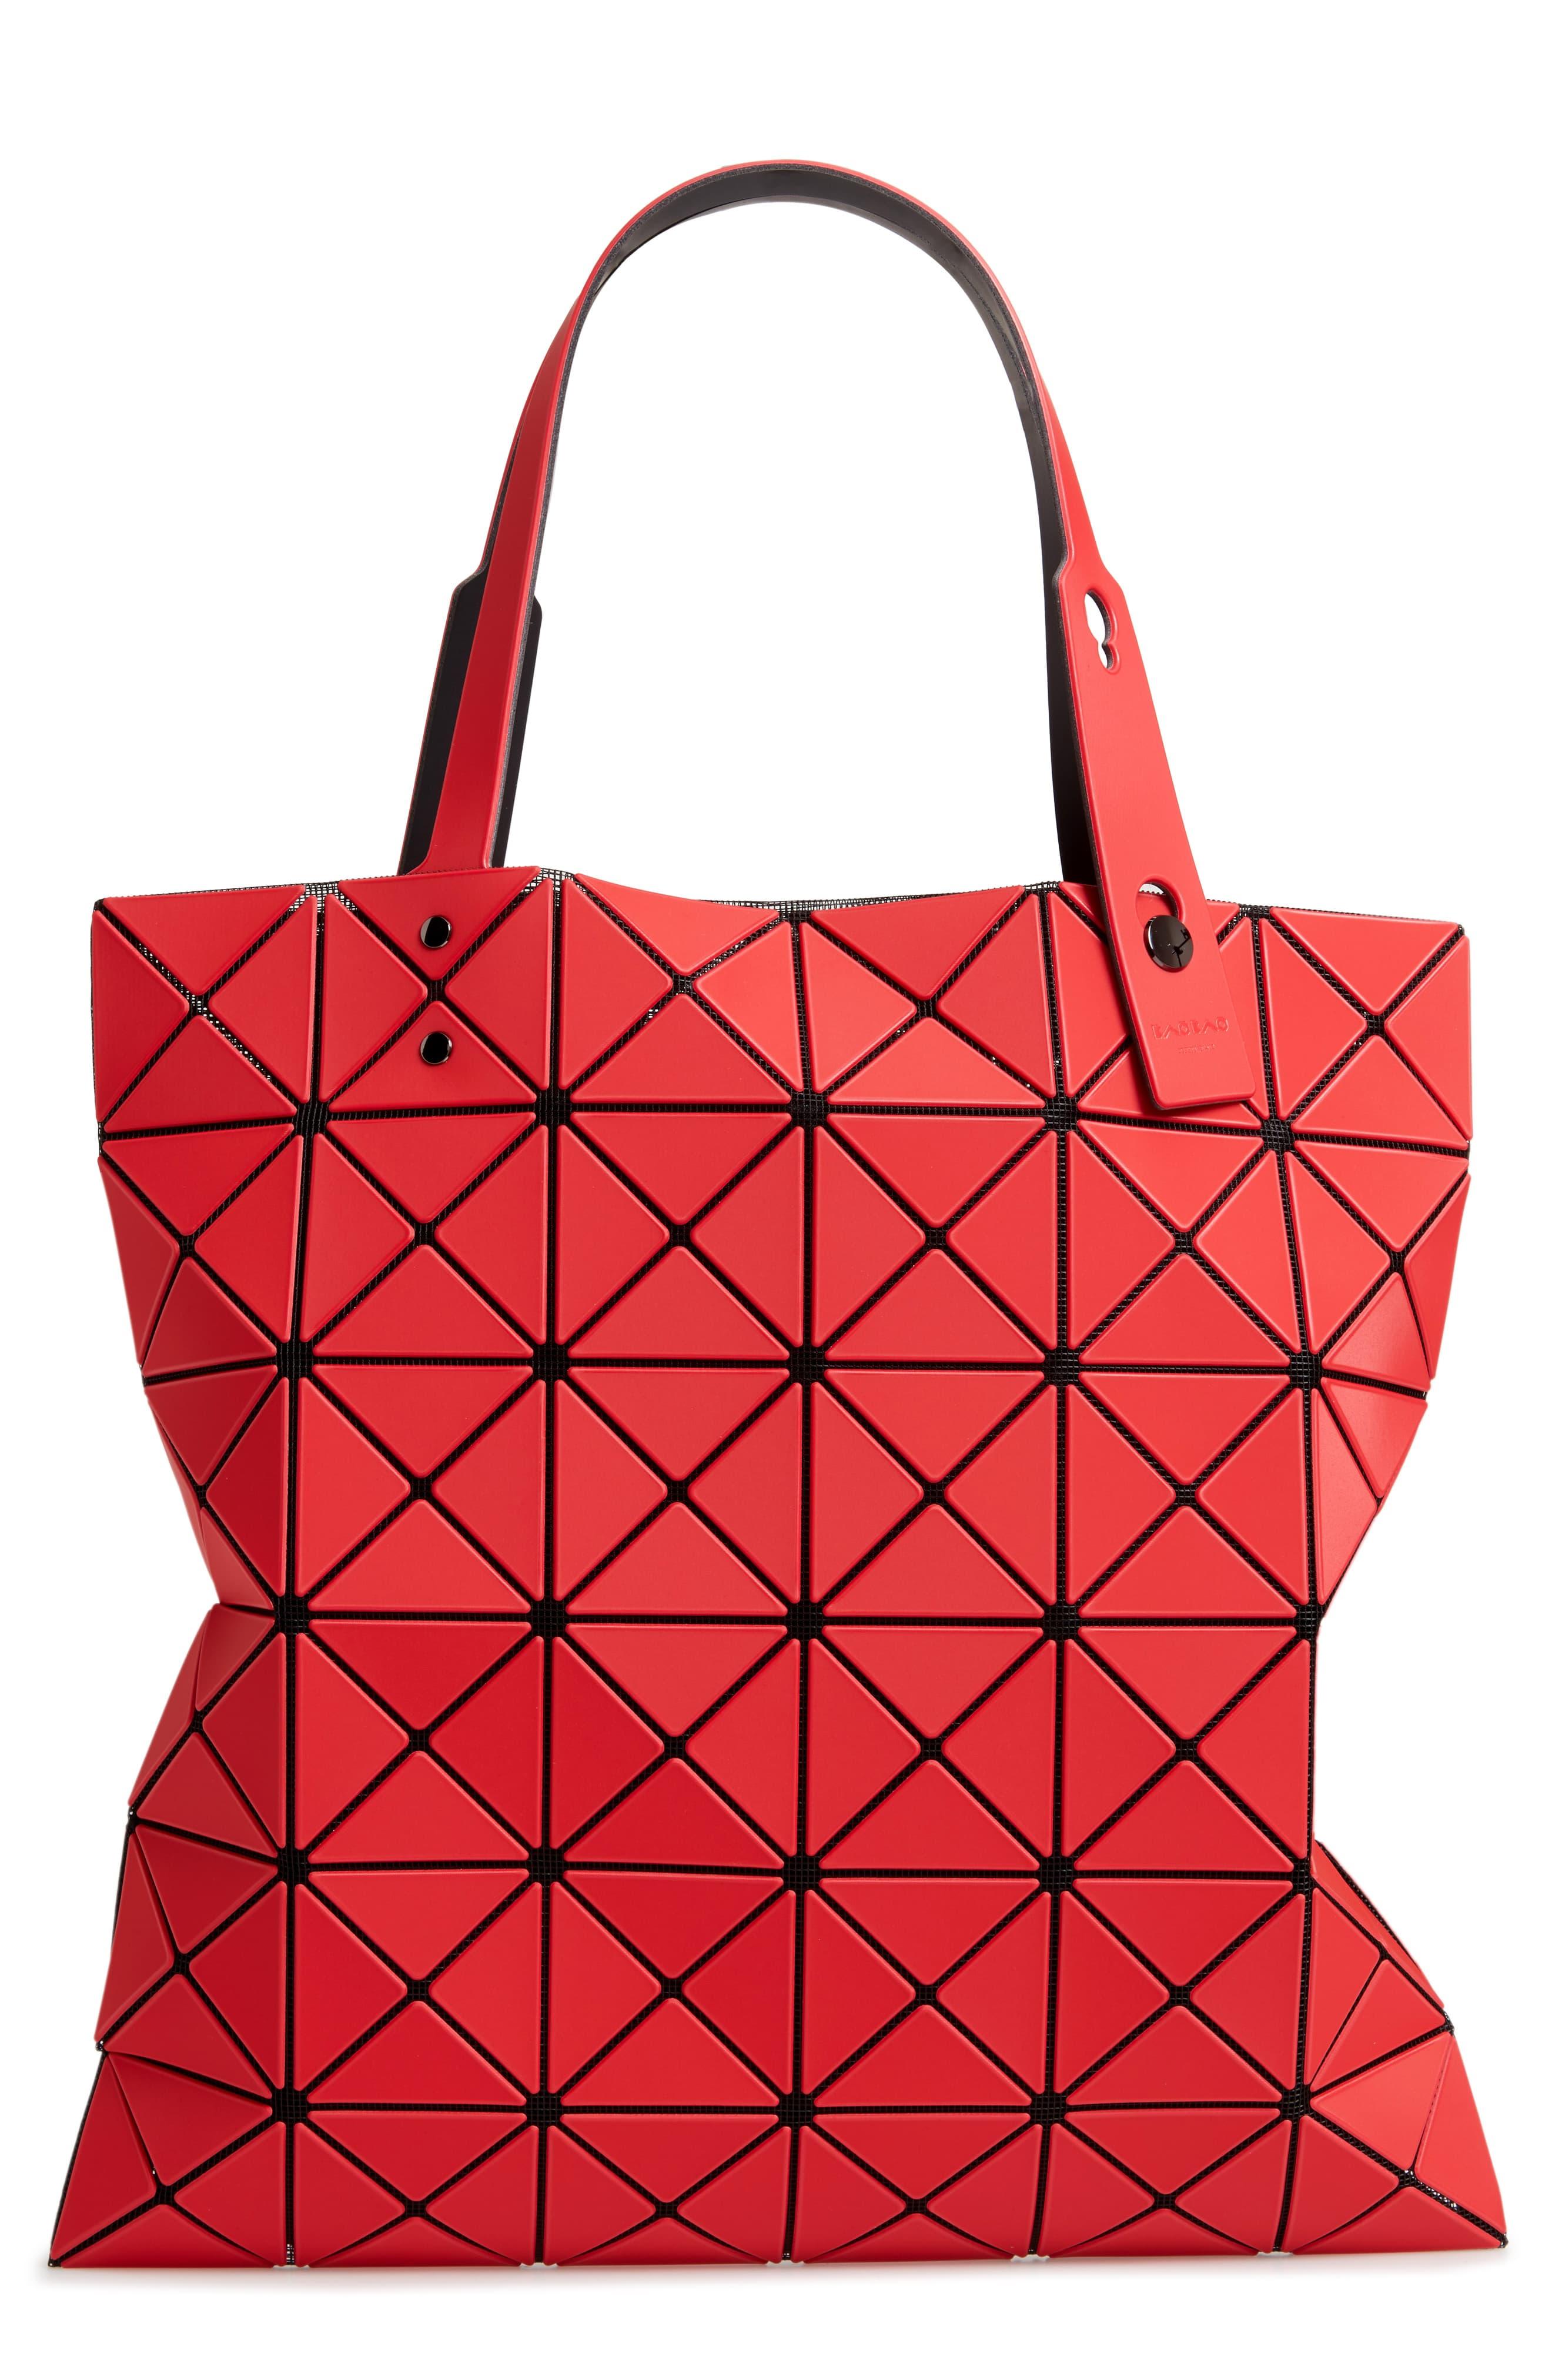 Bao Bao Issey Miyake Lucent Frost Tote in Red - Lyst